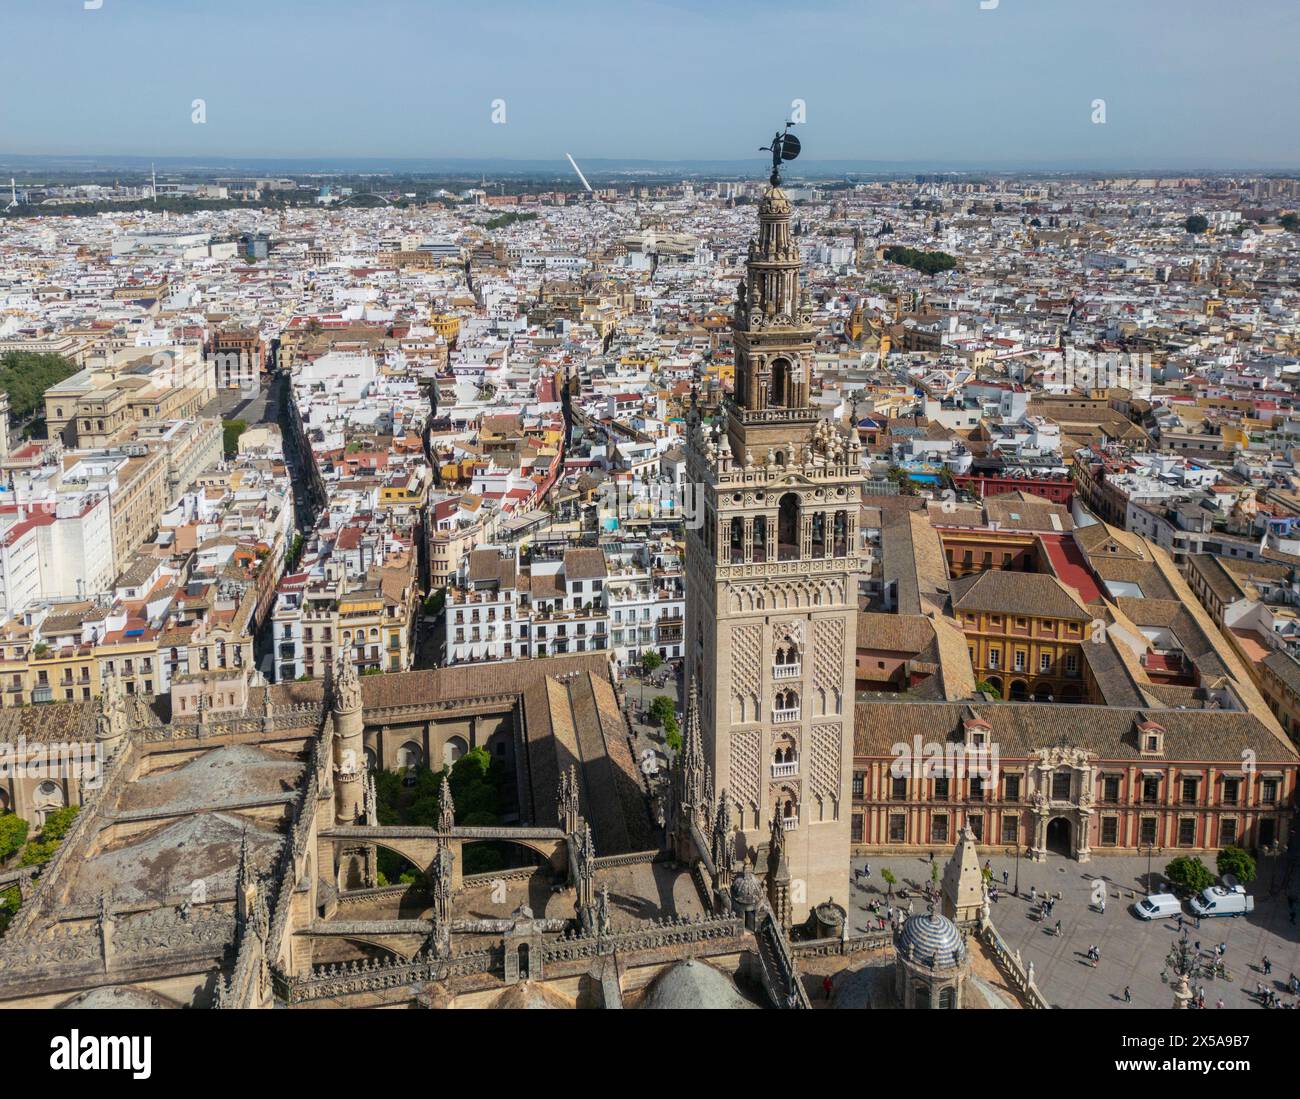 An aerial shot of Seville captures the majestic Cathedral and its iconic bell tower, La Giralda, a symbol of the city since the 16th century, along wi Stock Photo